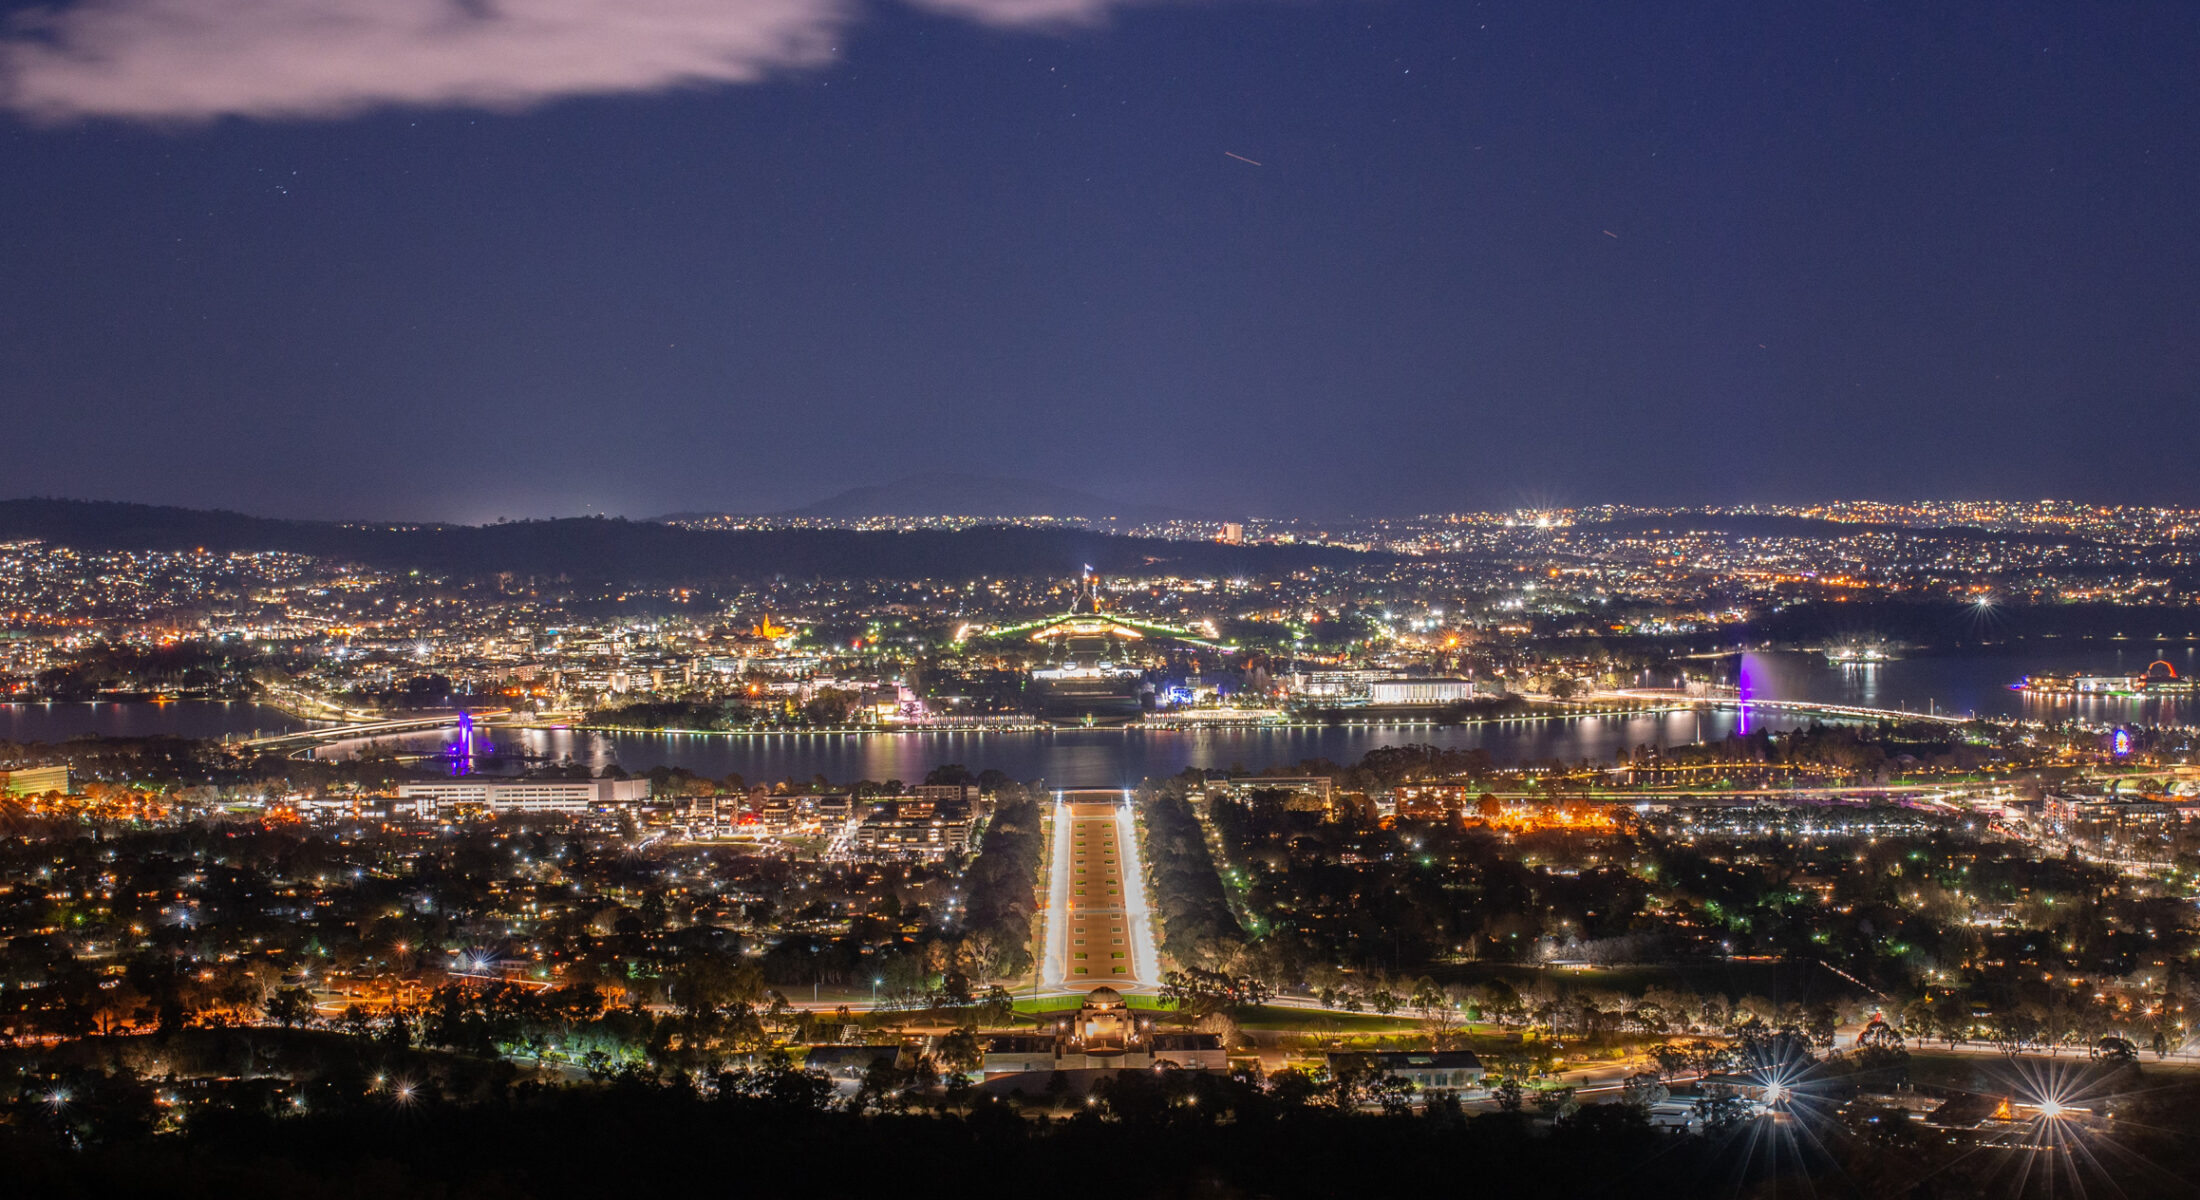 Mount Ainslie lookout at night